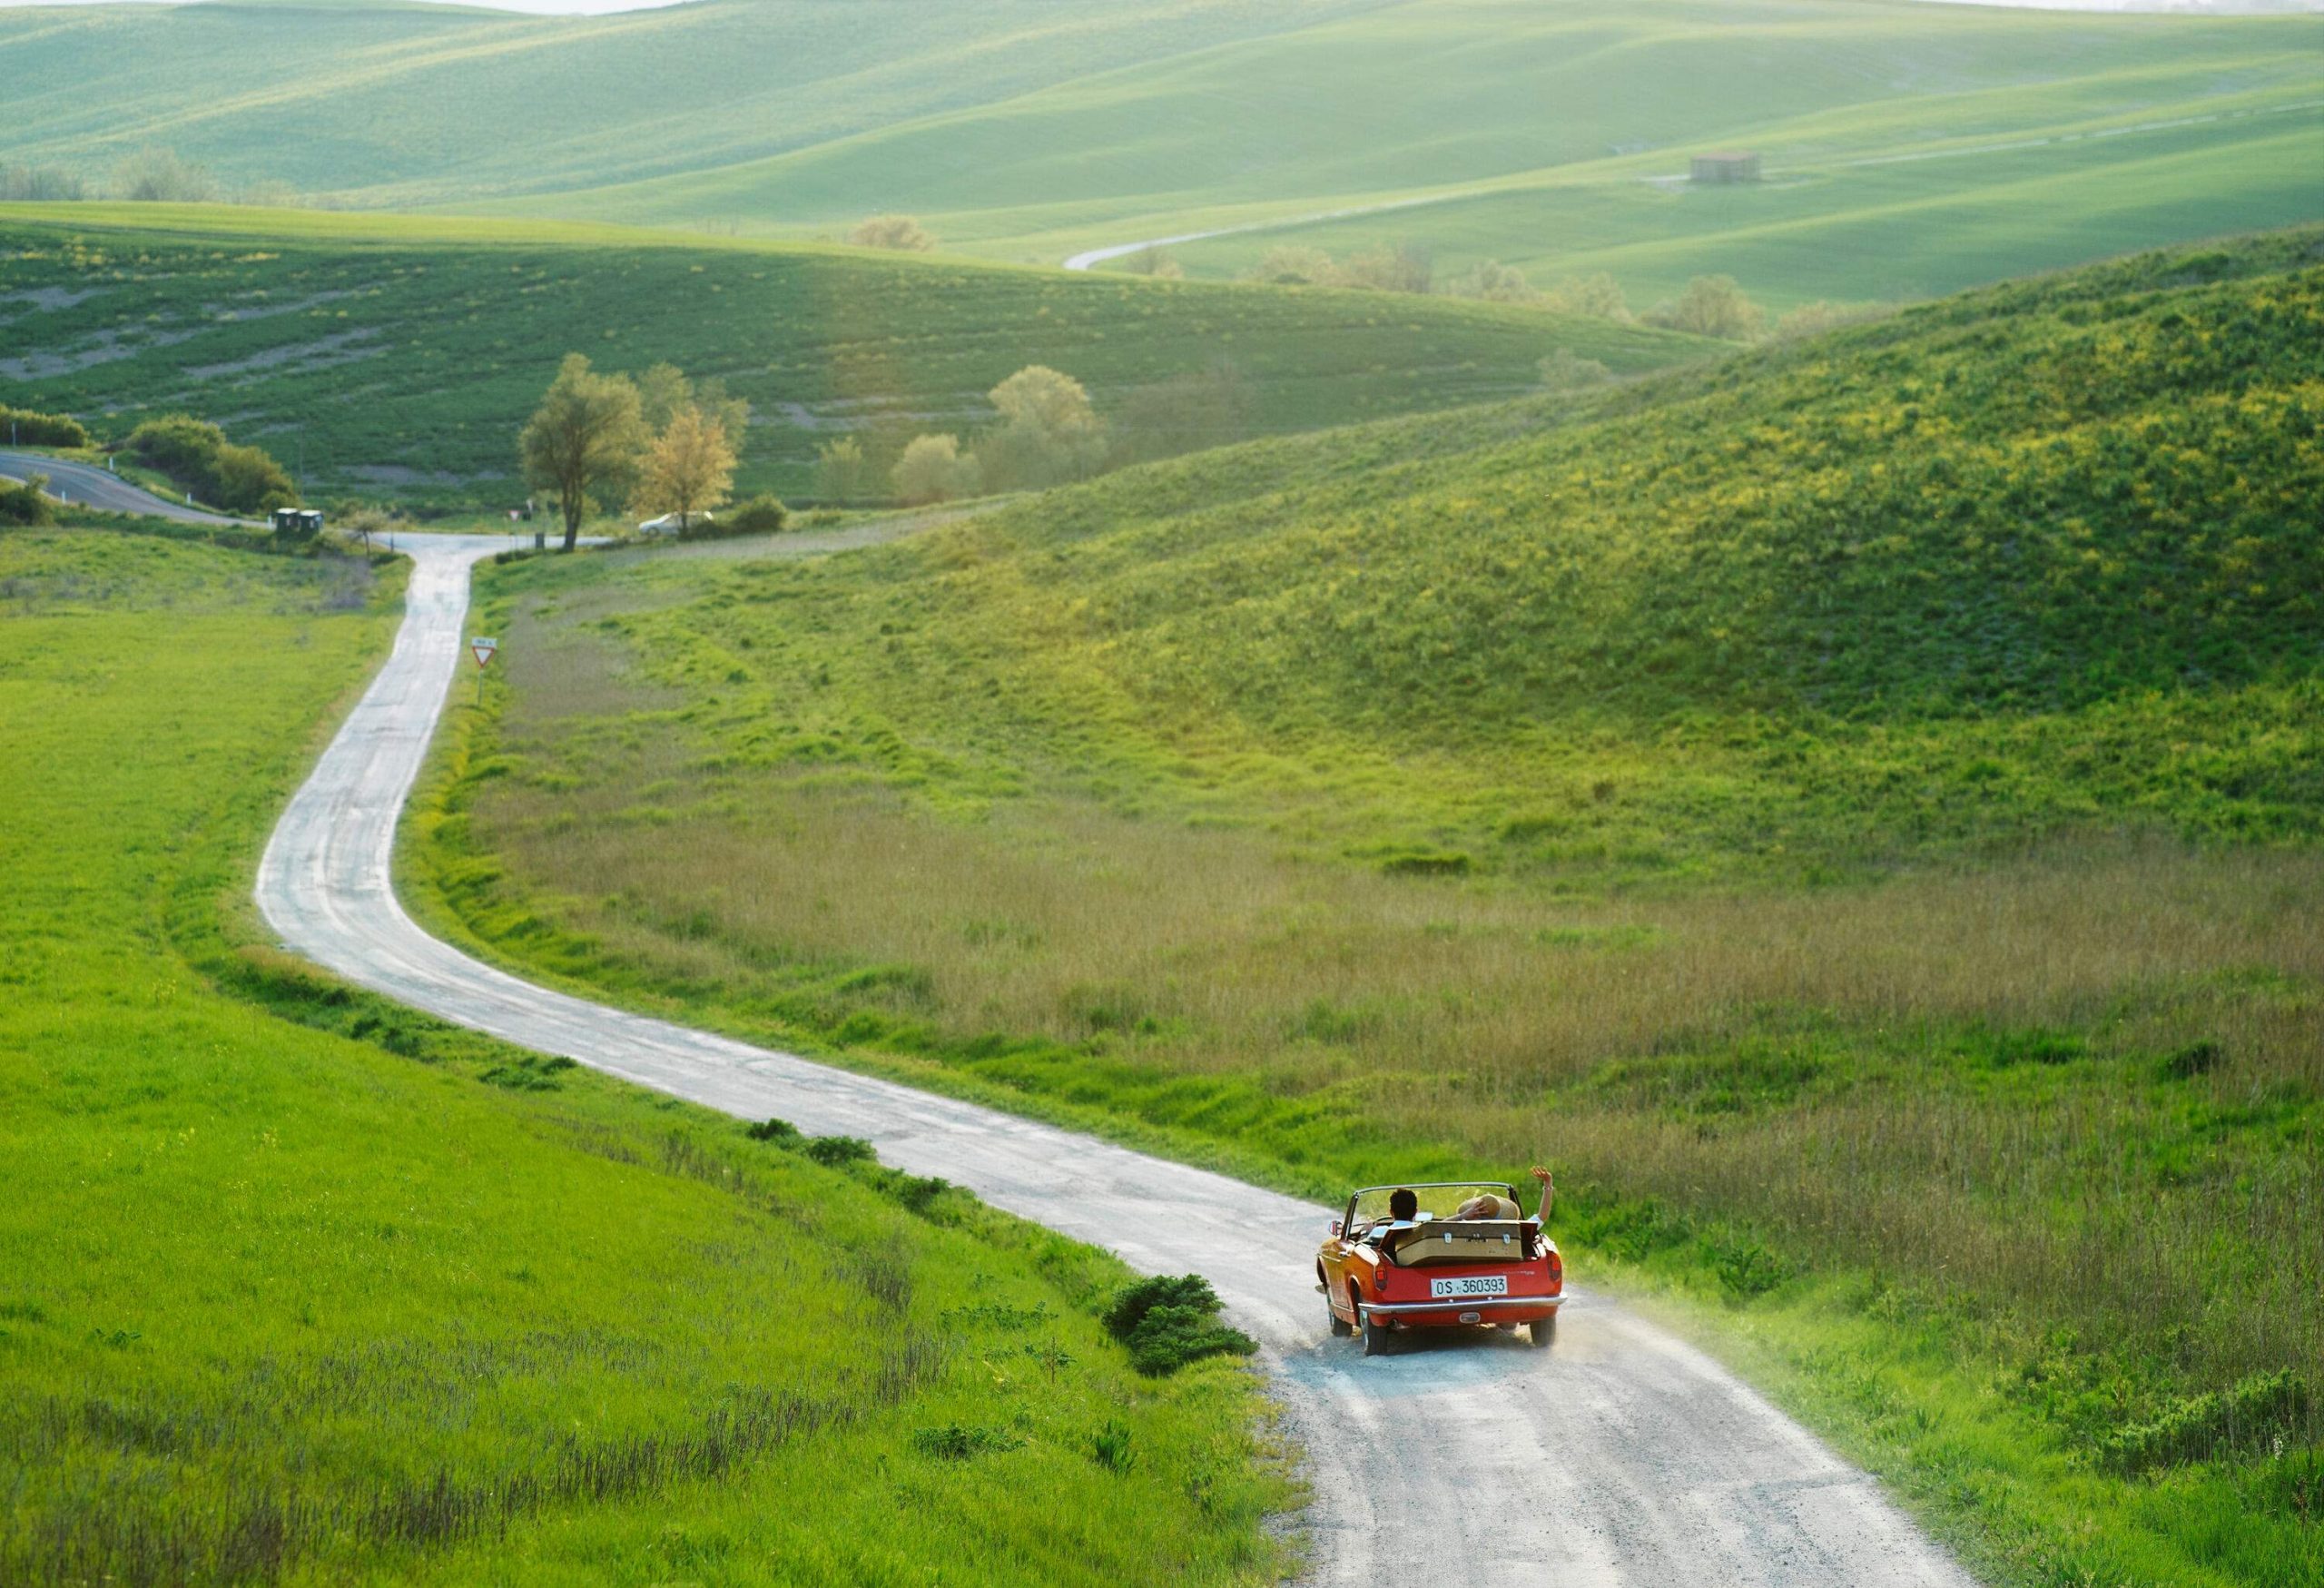 A couple in a red car travelling on an unpaved white downhill road towards the green fields.